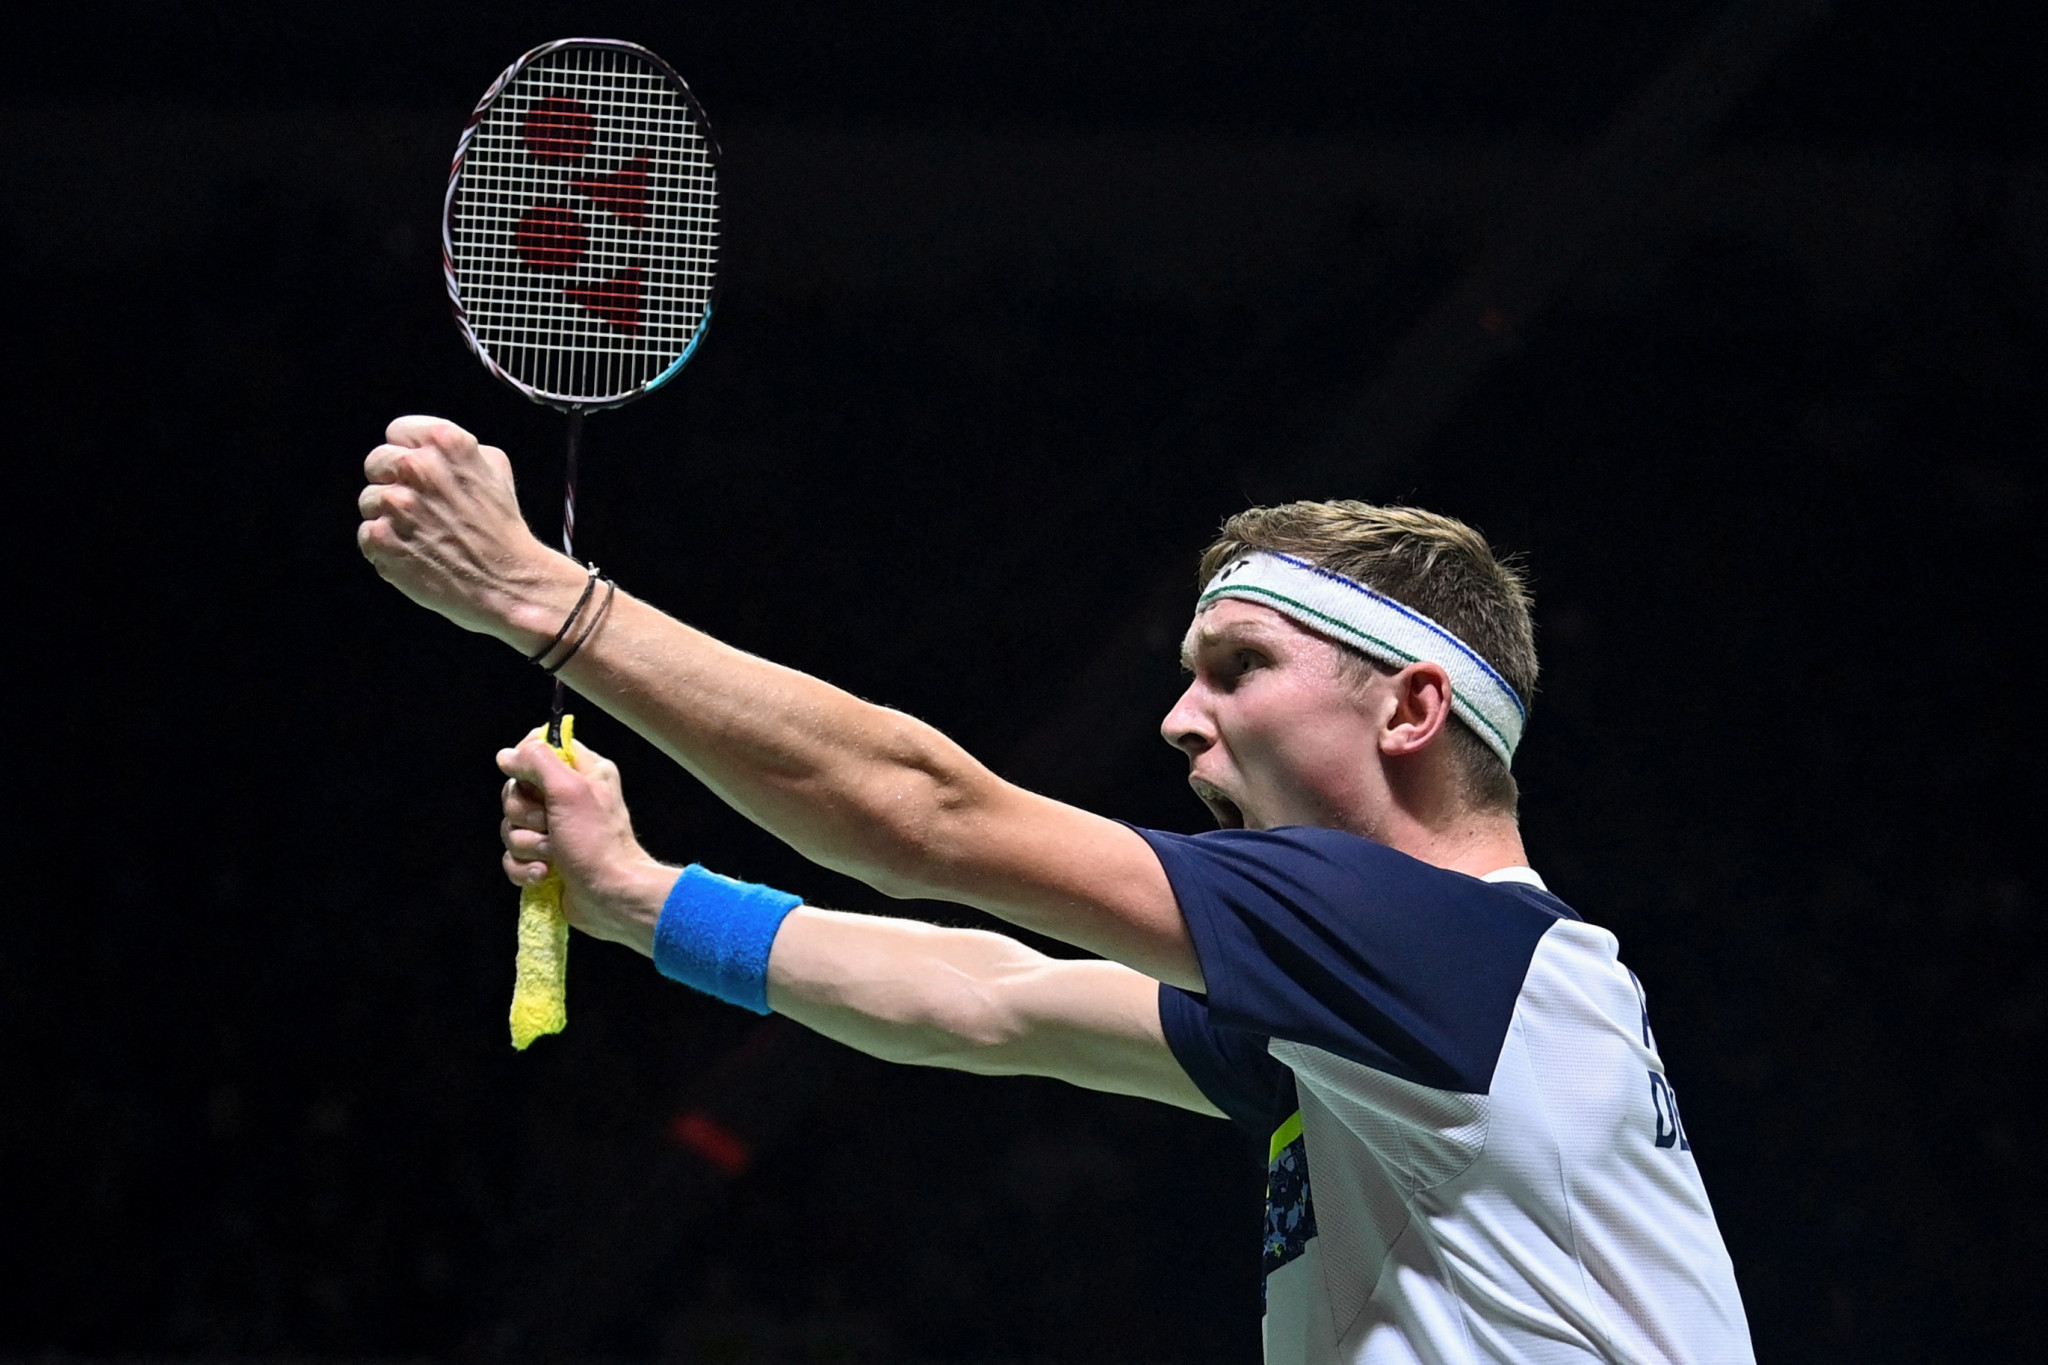 Viktor Axelsen dispatched Kanta Tsuneyama to sail into round two ©Getty Images